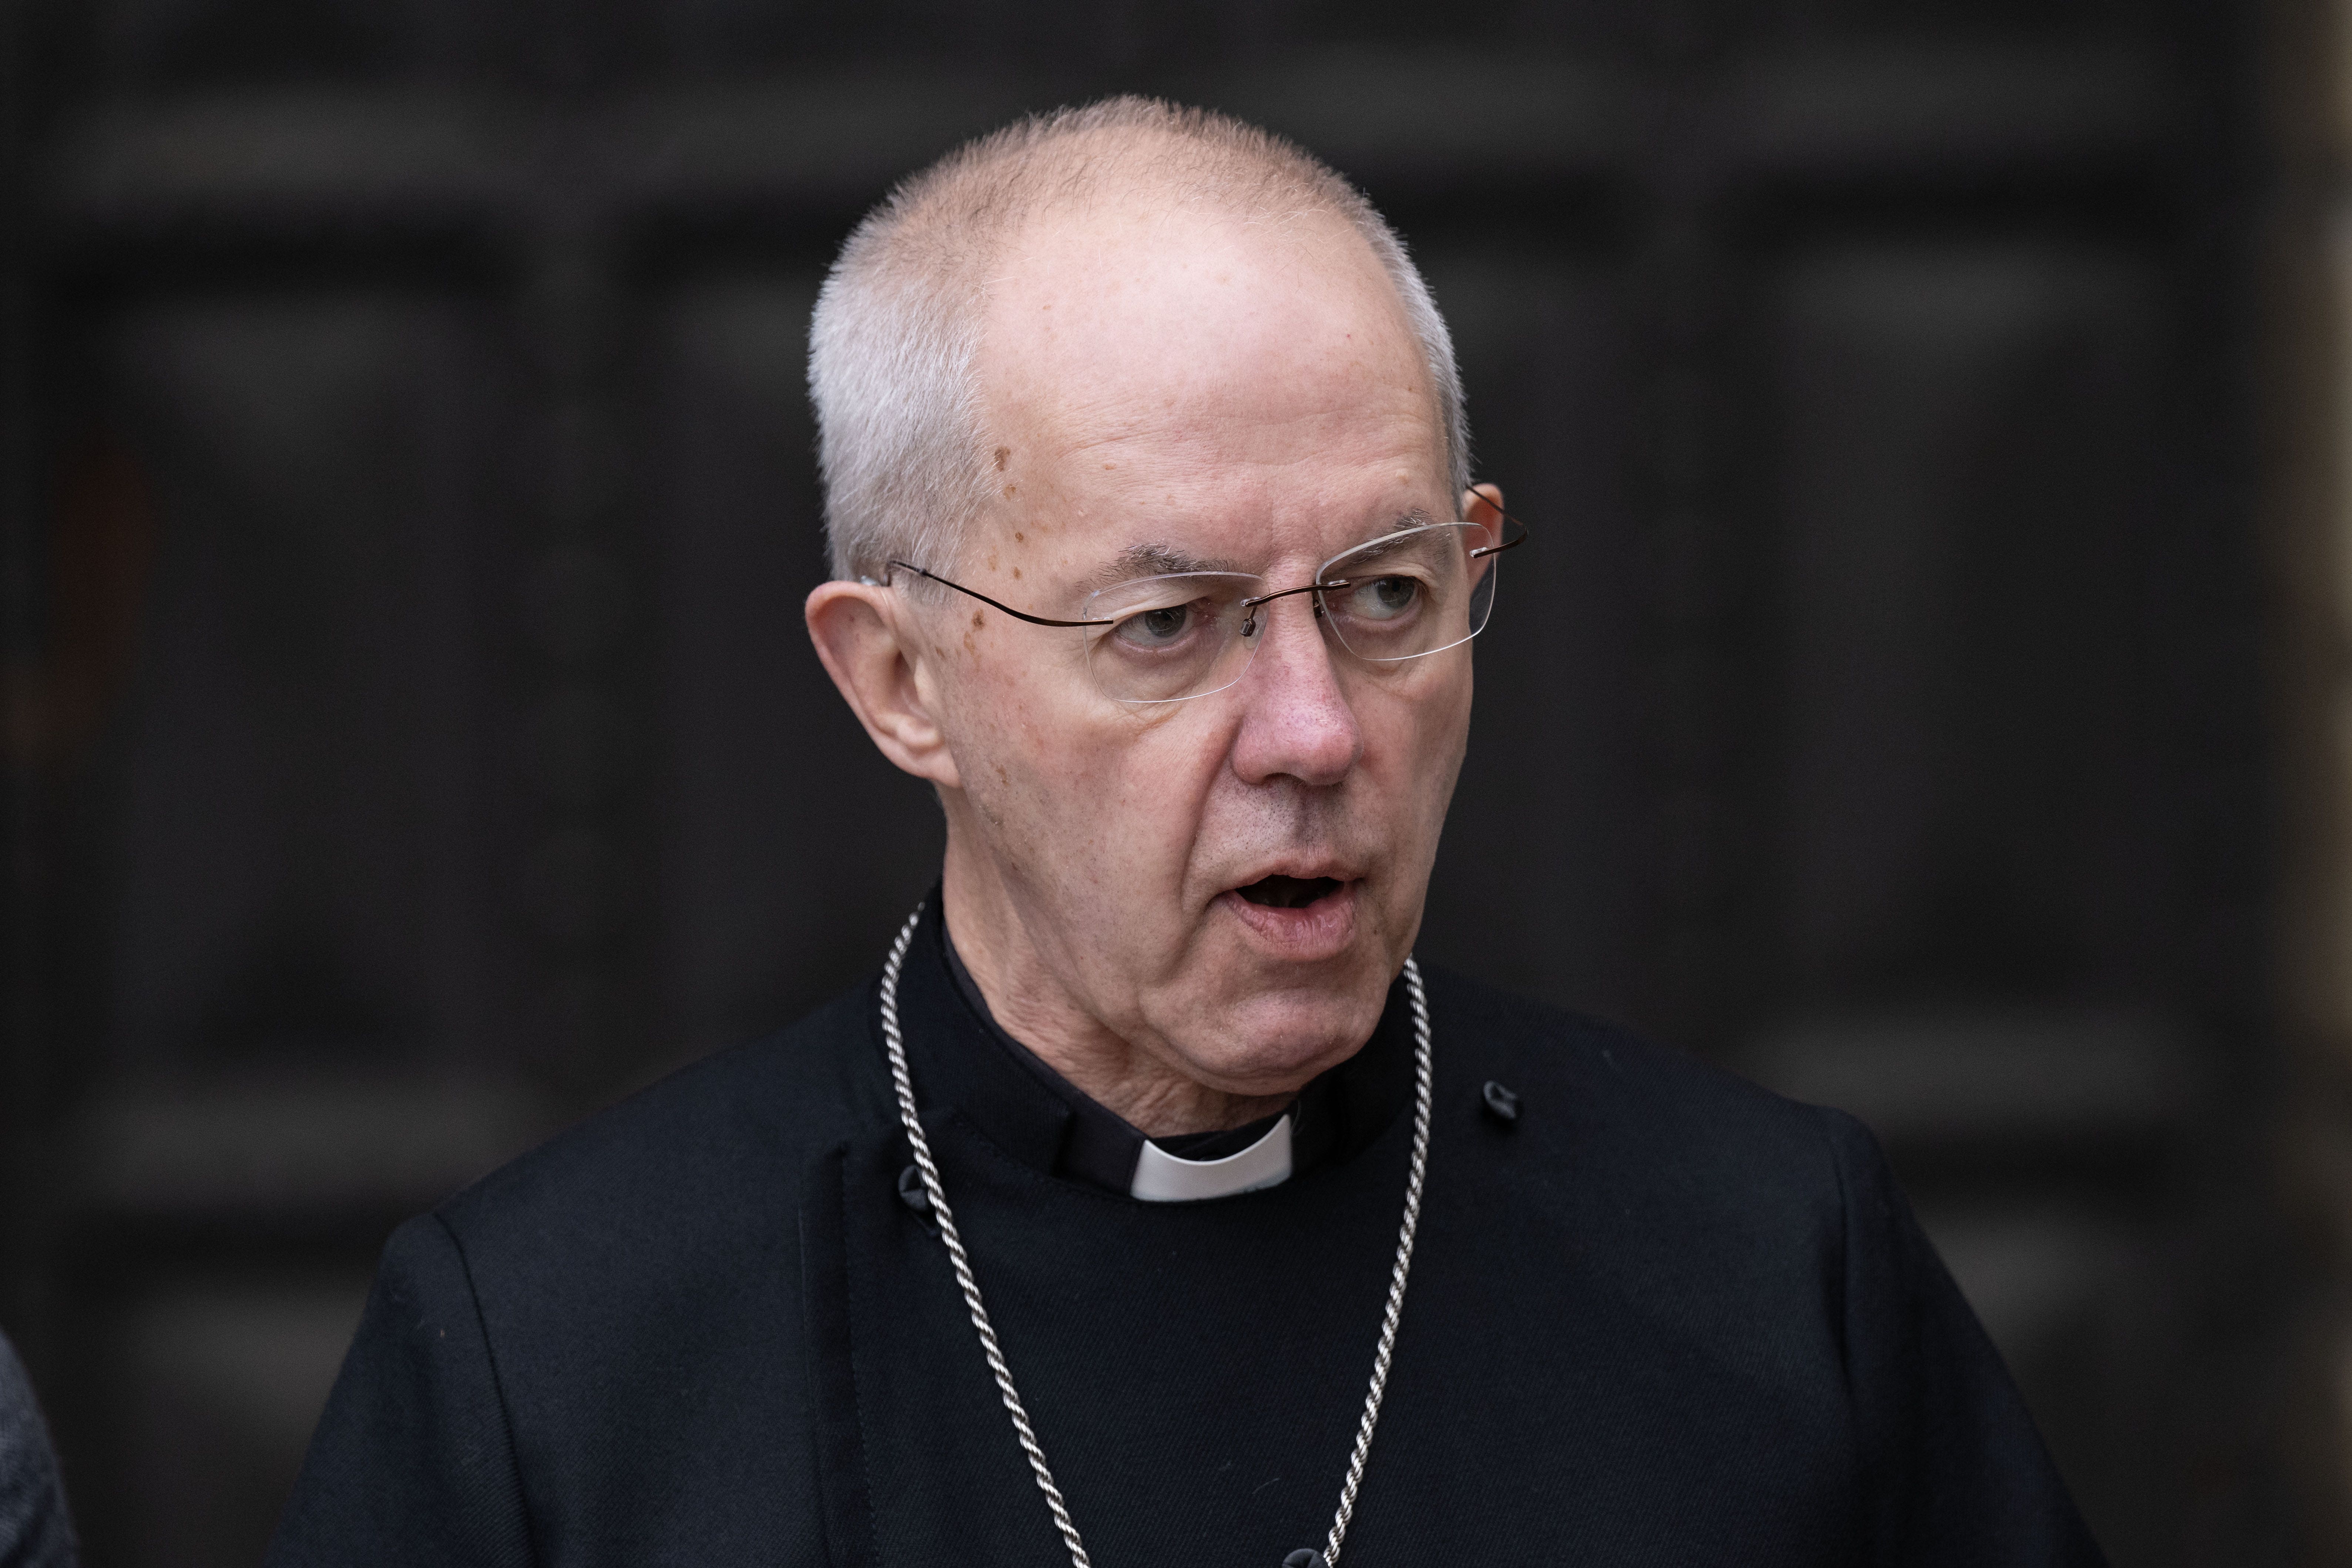 Justin Welby says Kate should be given peace to recover